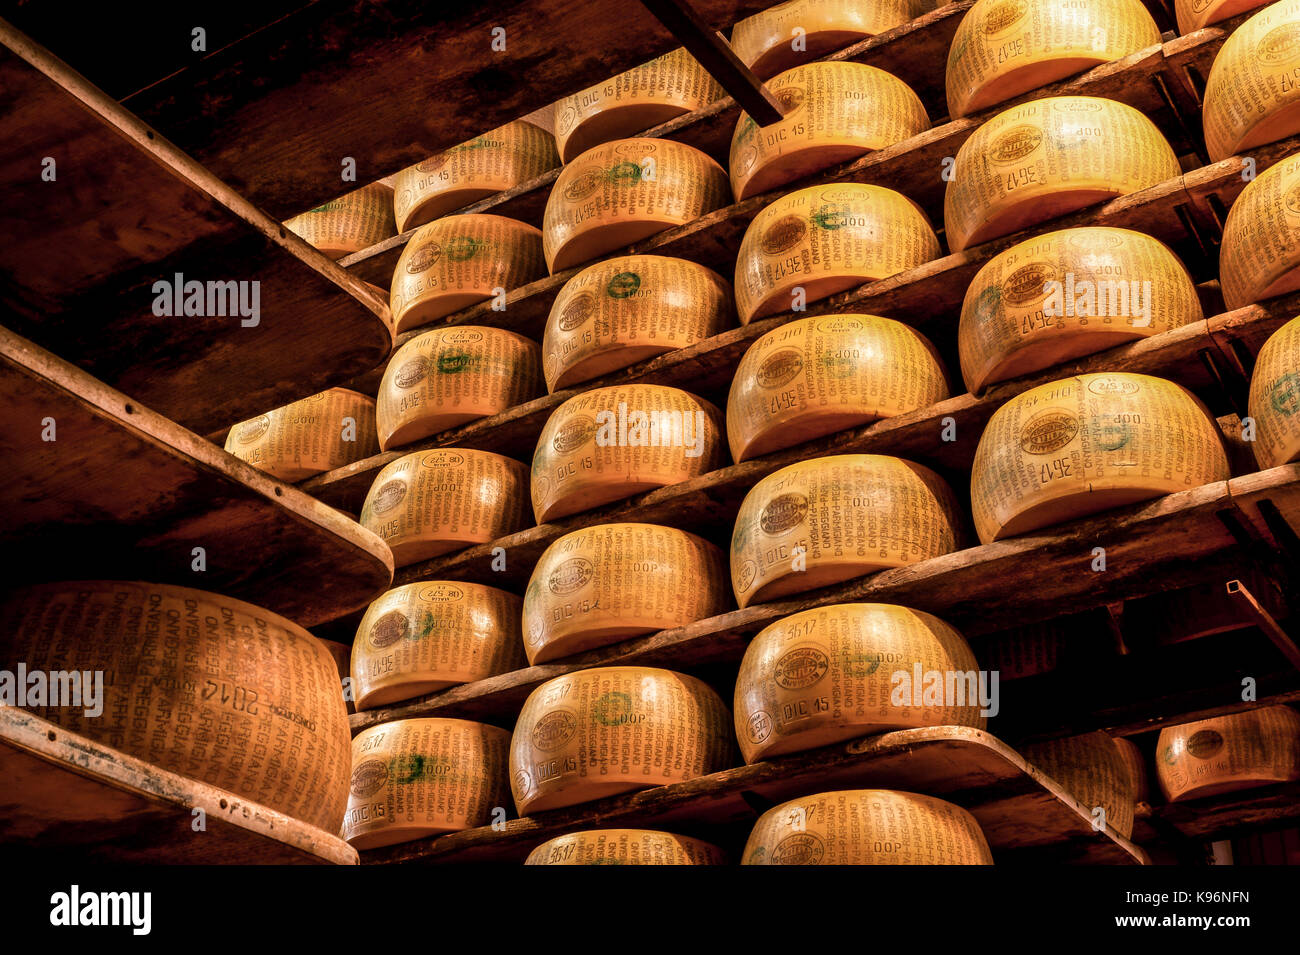 Whole Parmigiano-Reggiano cheeses sit on storage racks during the aging process Stock Photo